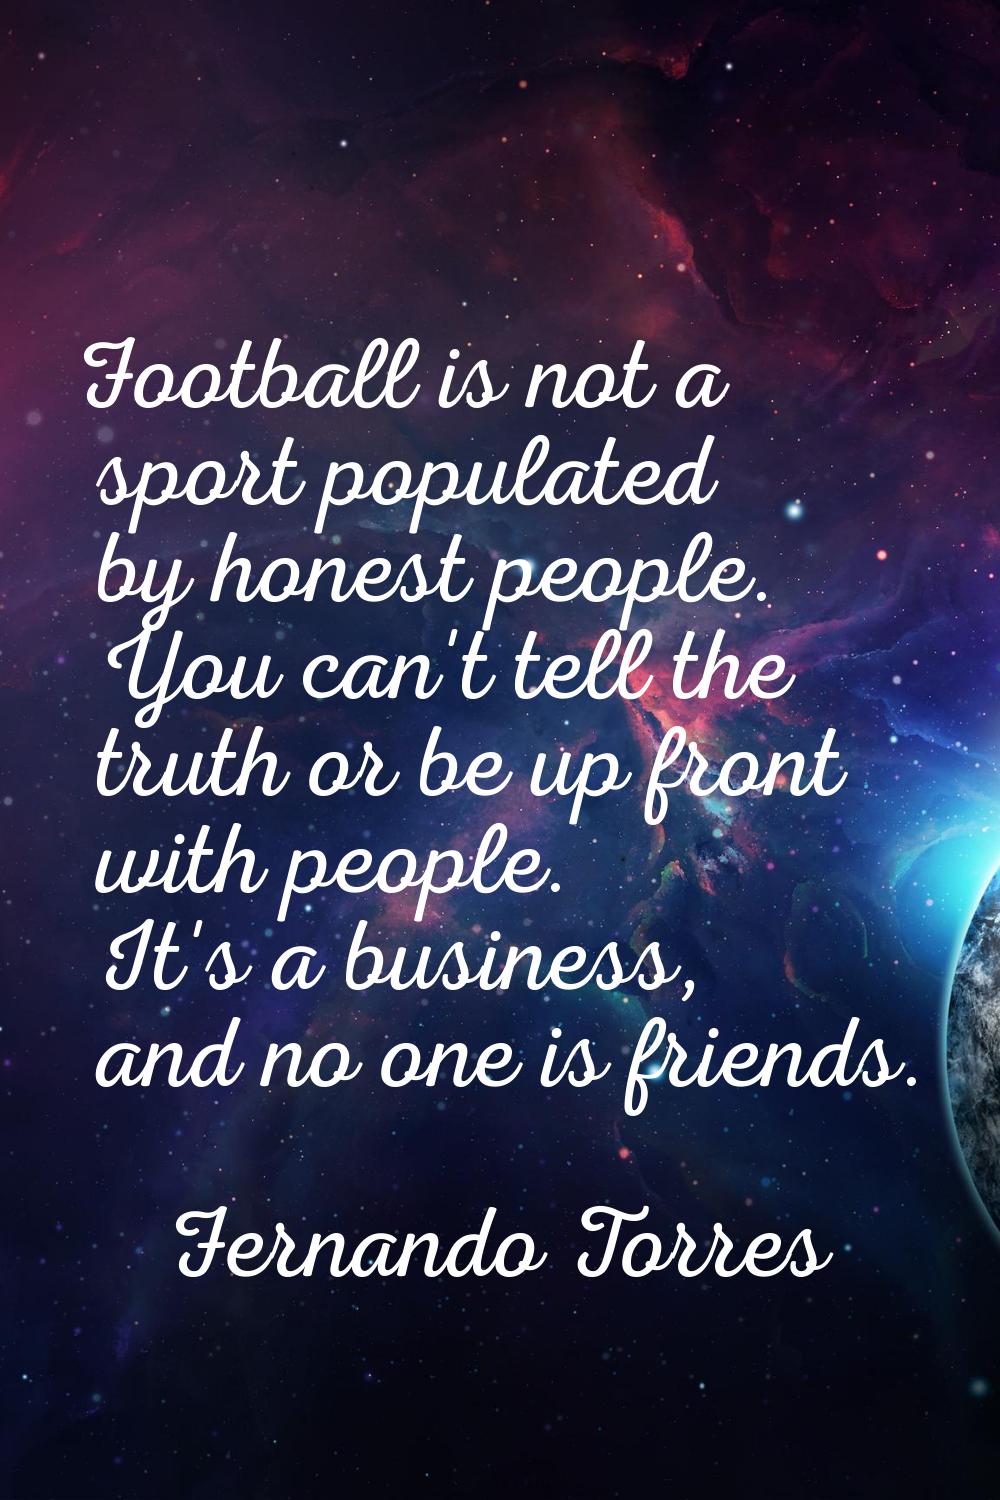 Football is not a sport populated by honest people. You can't tell the truth or be up front with pe